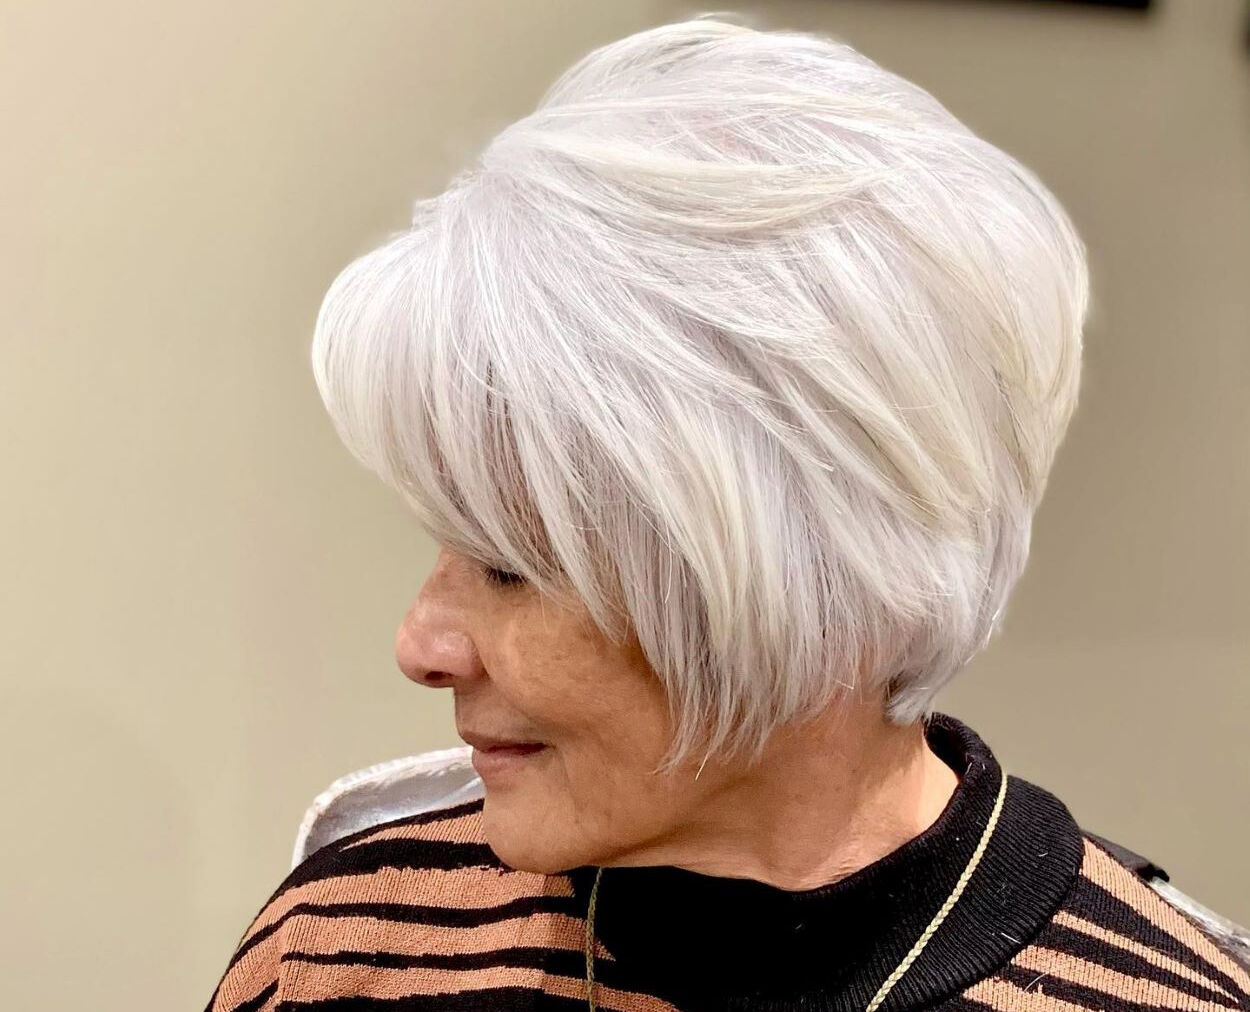 Proven White Hair Treatment Solutions  Say Goodbye to Grey